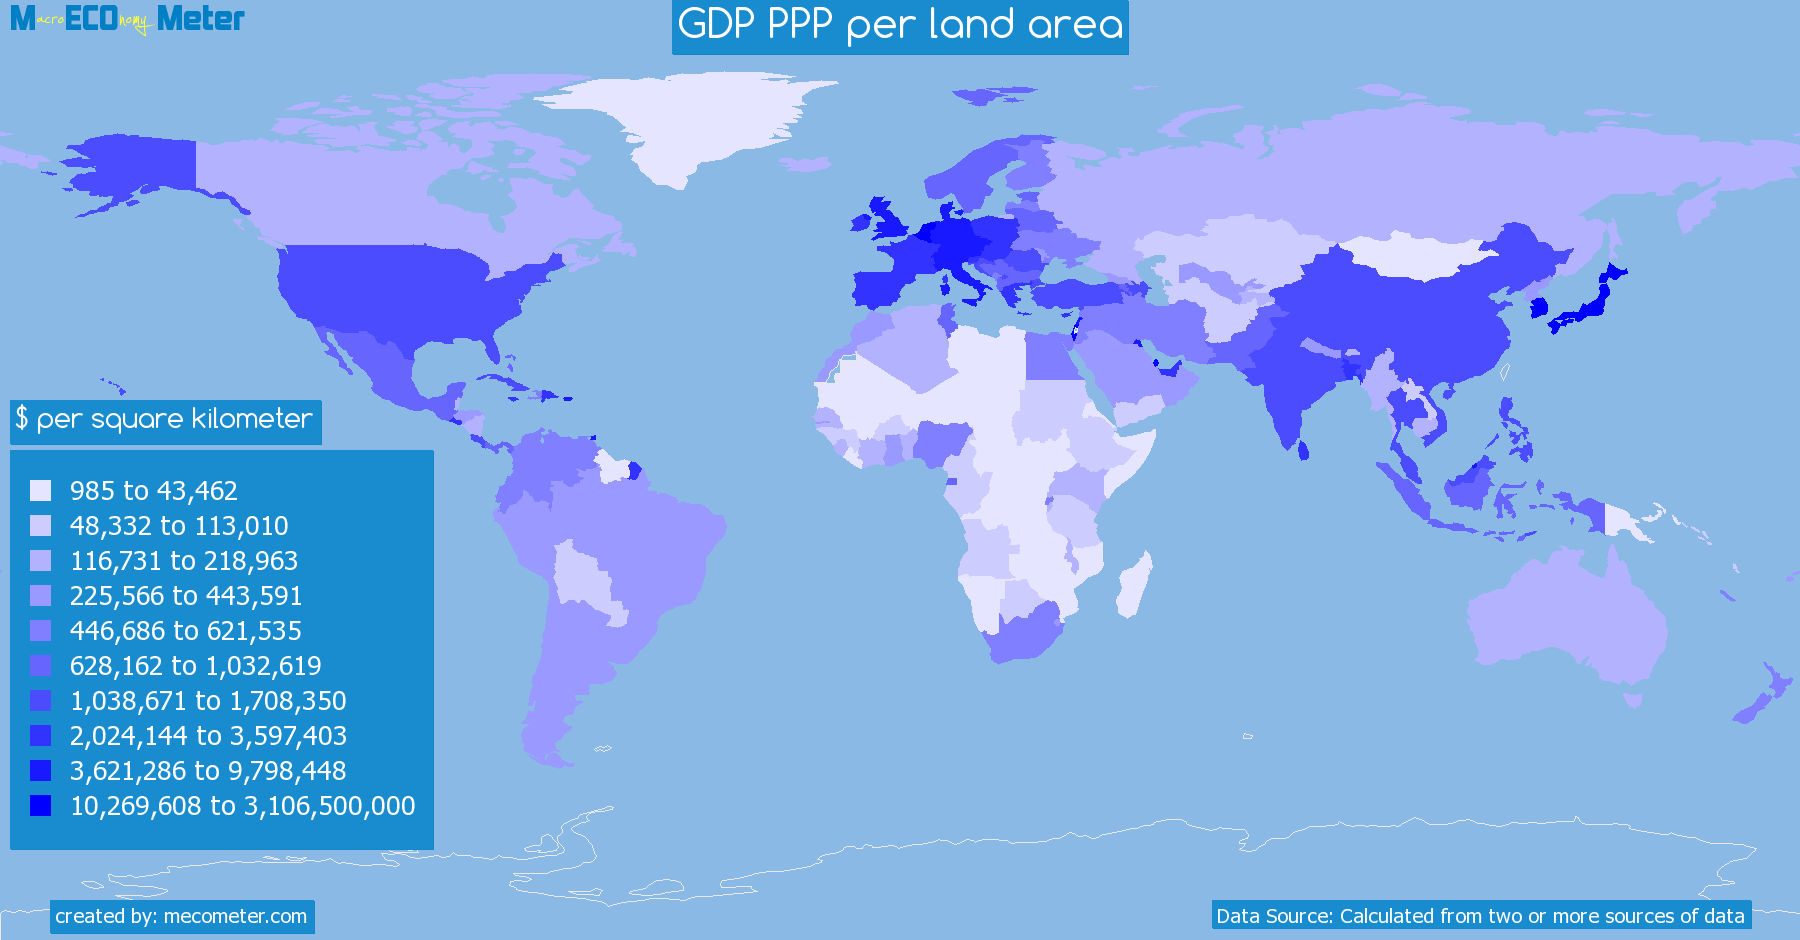 Worldmap of all countries colored to reflect the values of GDP PPP per land area